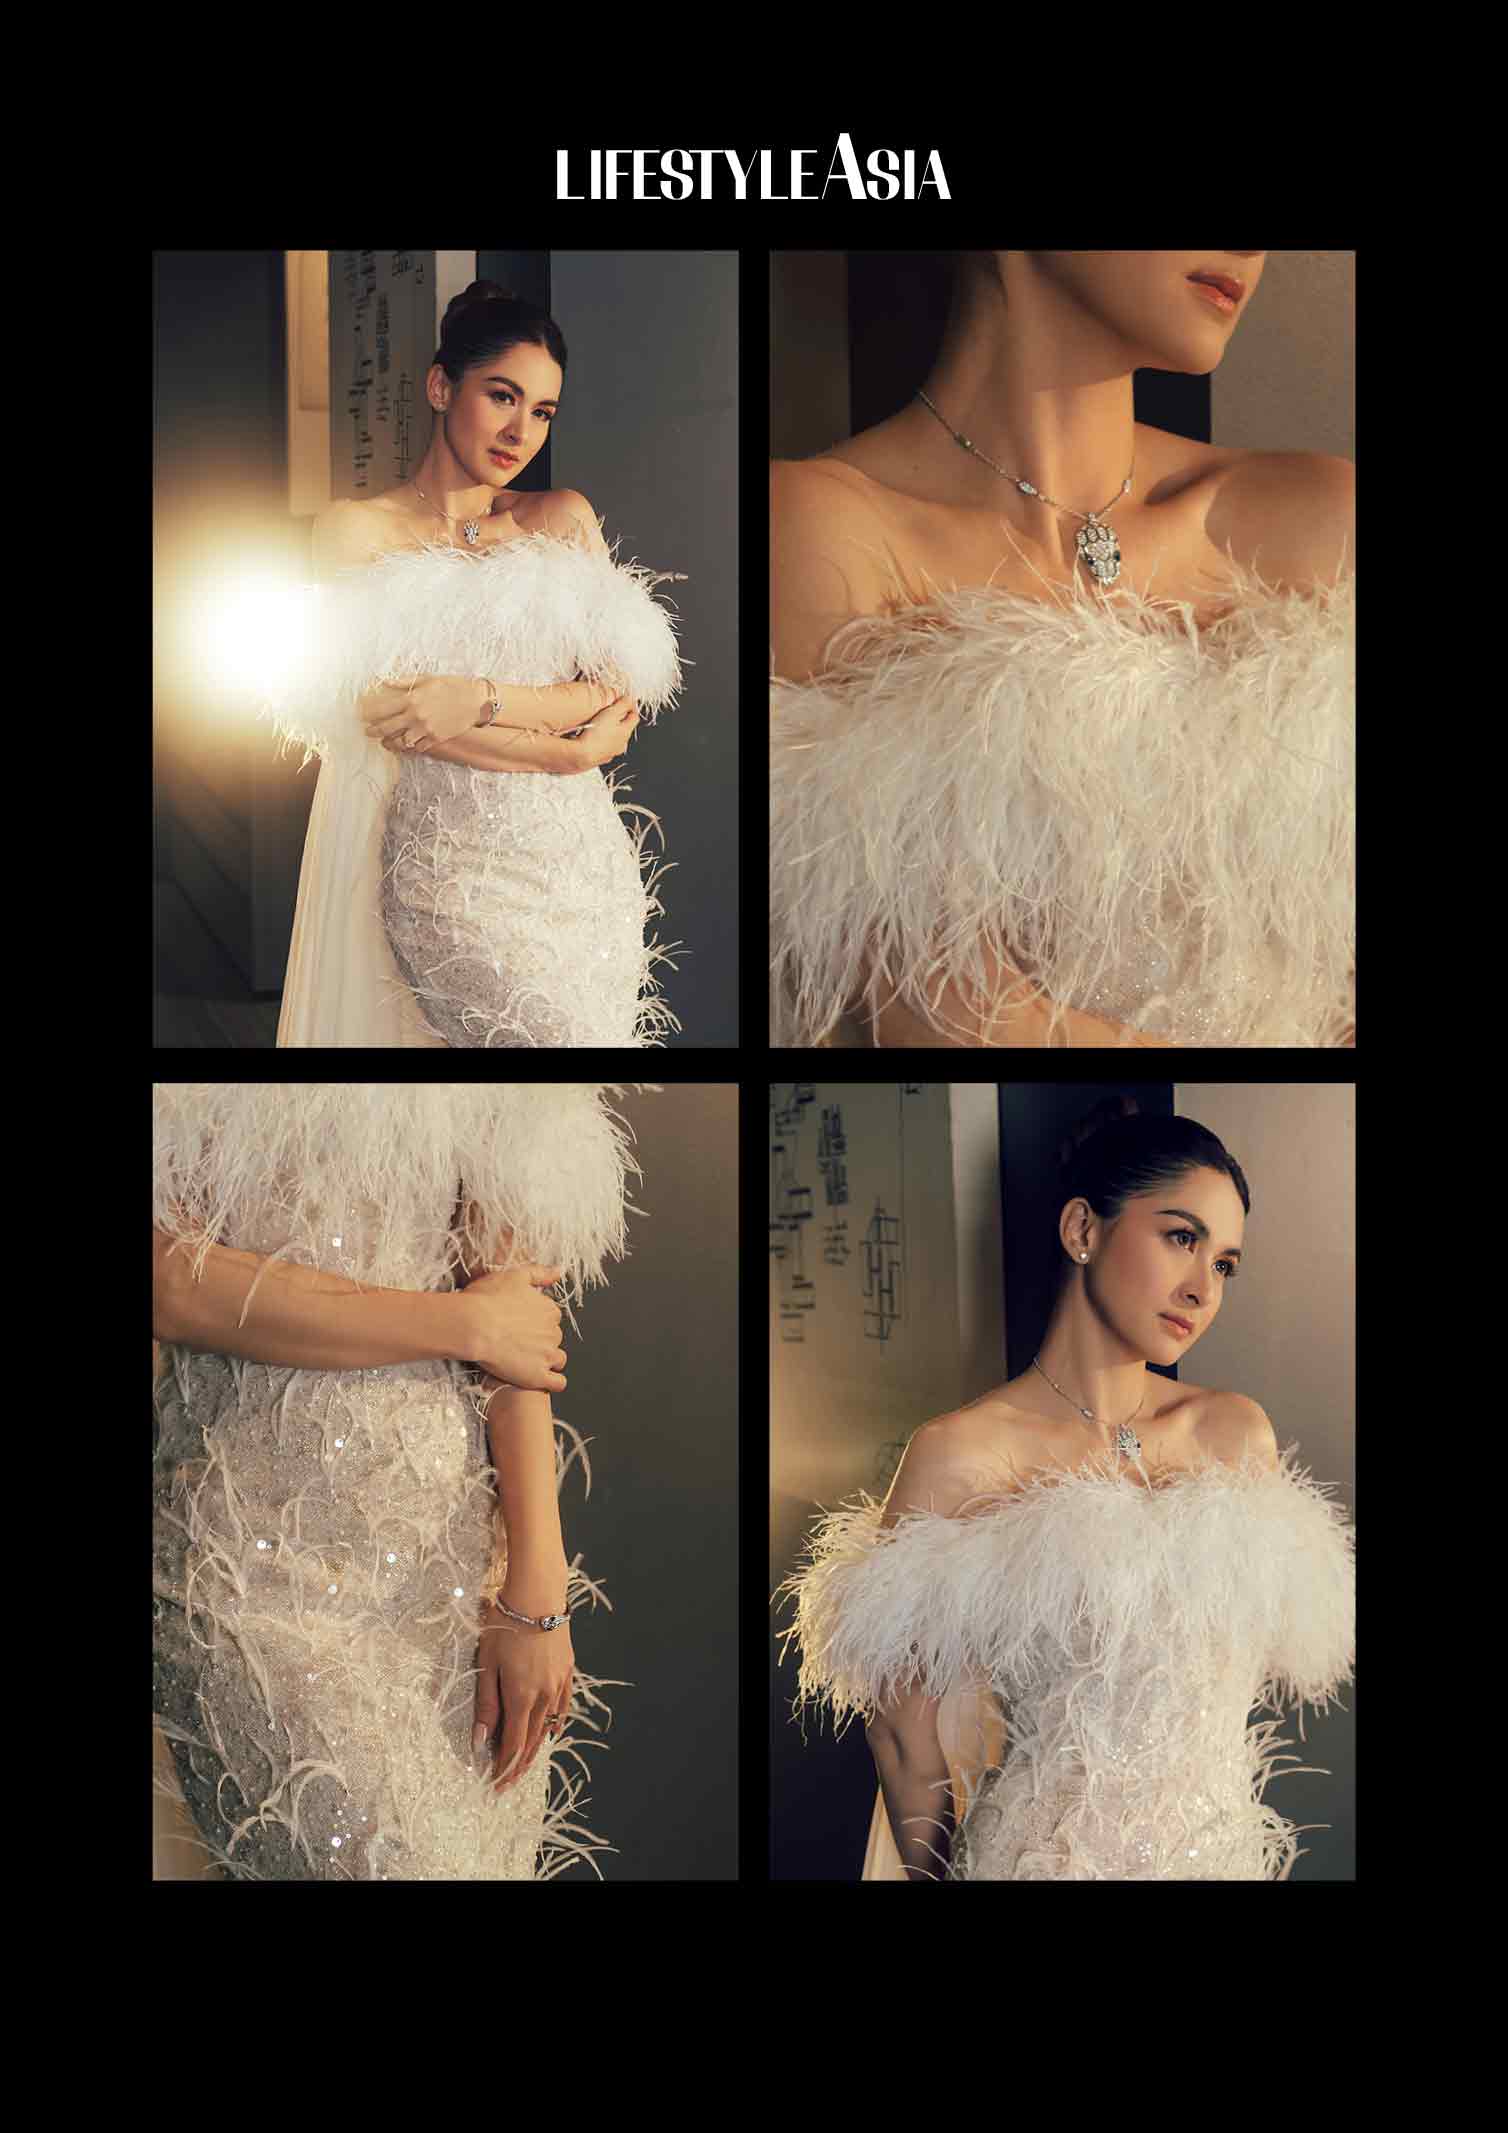 Look: Marian Rivera's Chanel Dinner Outfit